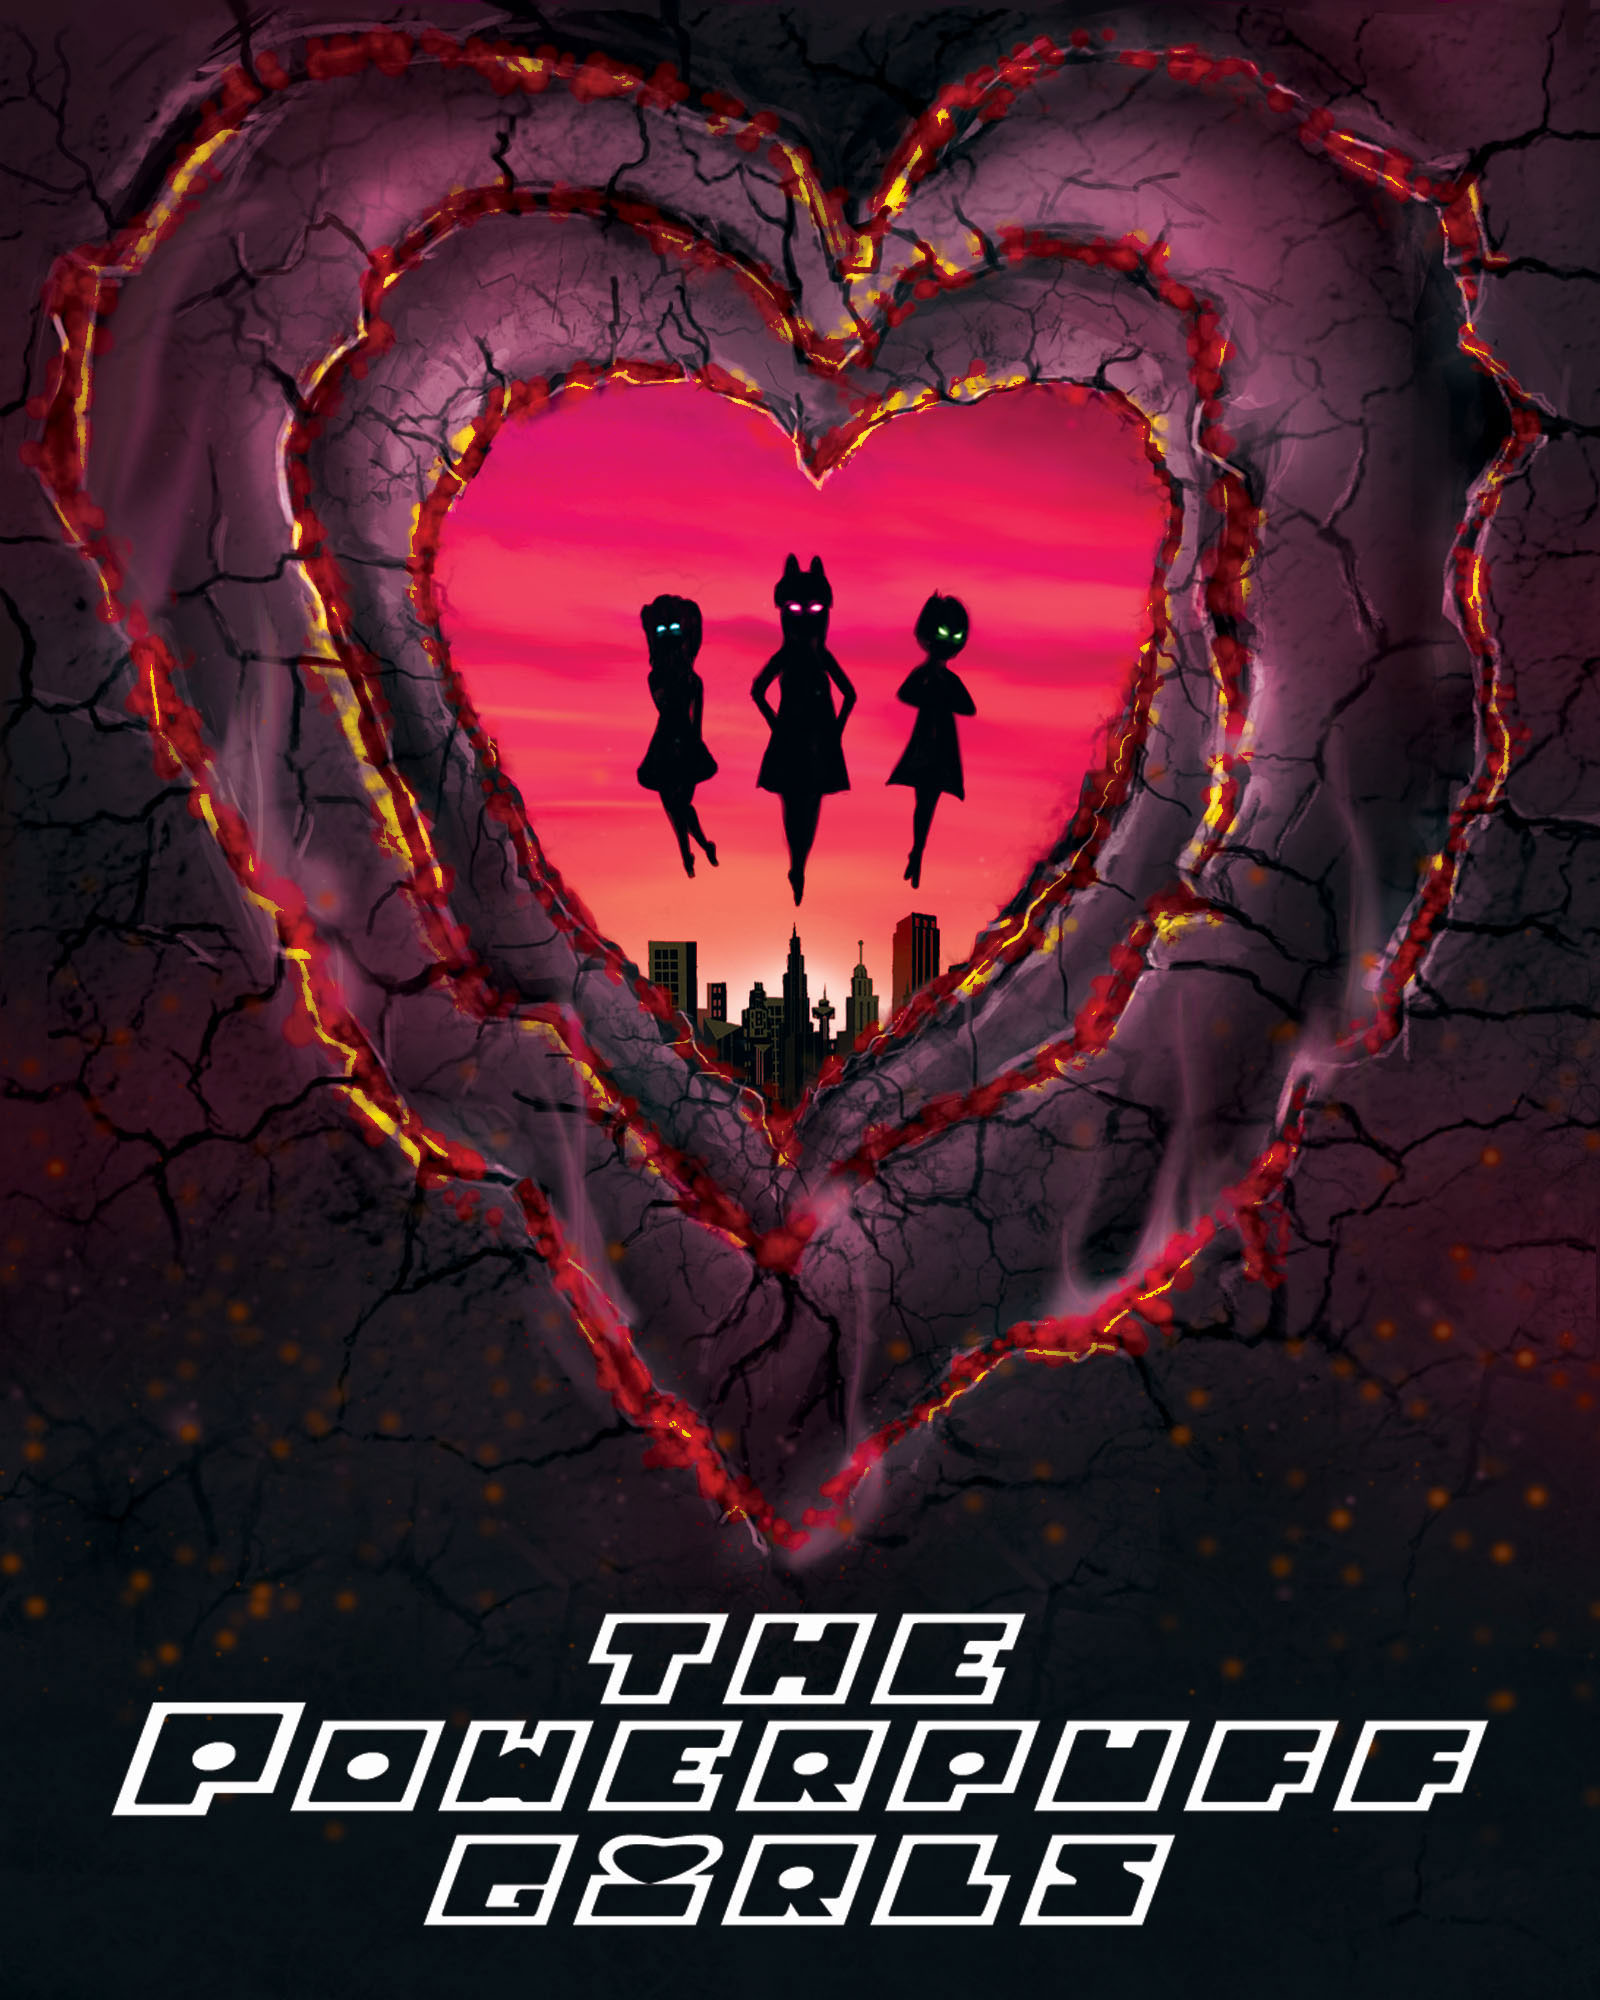 Powerpuffgirl Movie Poster Reboot
  
  <p>CONCEPT:  create a reboot movie poster of an old cartoon/movie</p>
  <p>HOW DESIGN SOLVES PROBLEMS,: Used the contrasting saturation composition as well as the iconic repeating hearts from the cartoon.</p>
  <p>PROCESS: digital sketching and refining</p>
  <p>TOOLS USED: Photoshop</p>
  <p>CHALLENGES: Working with the lighting to reveal character's face in a mysterious way, yet showing a warm feeling and mood.</p>
  